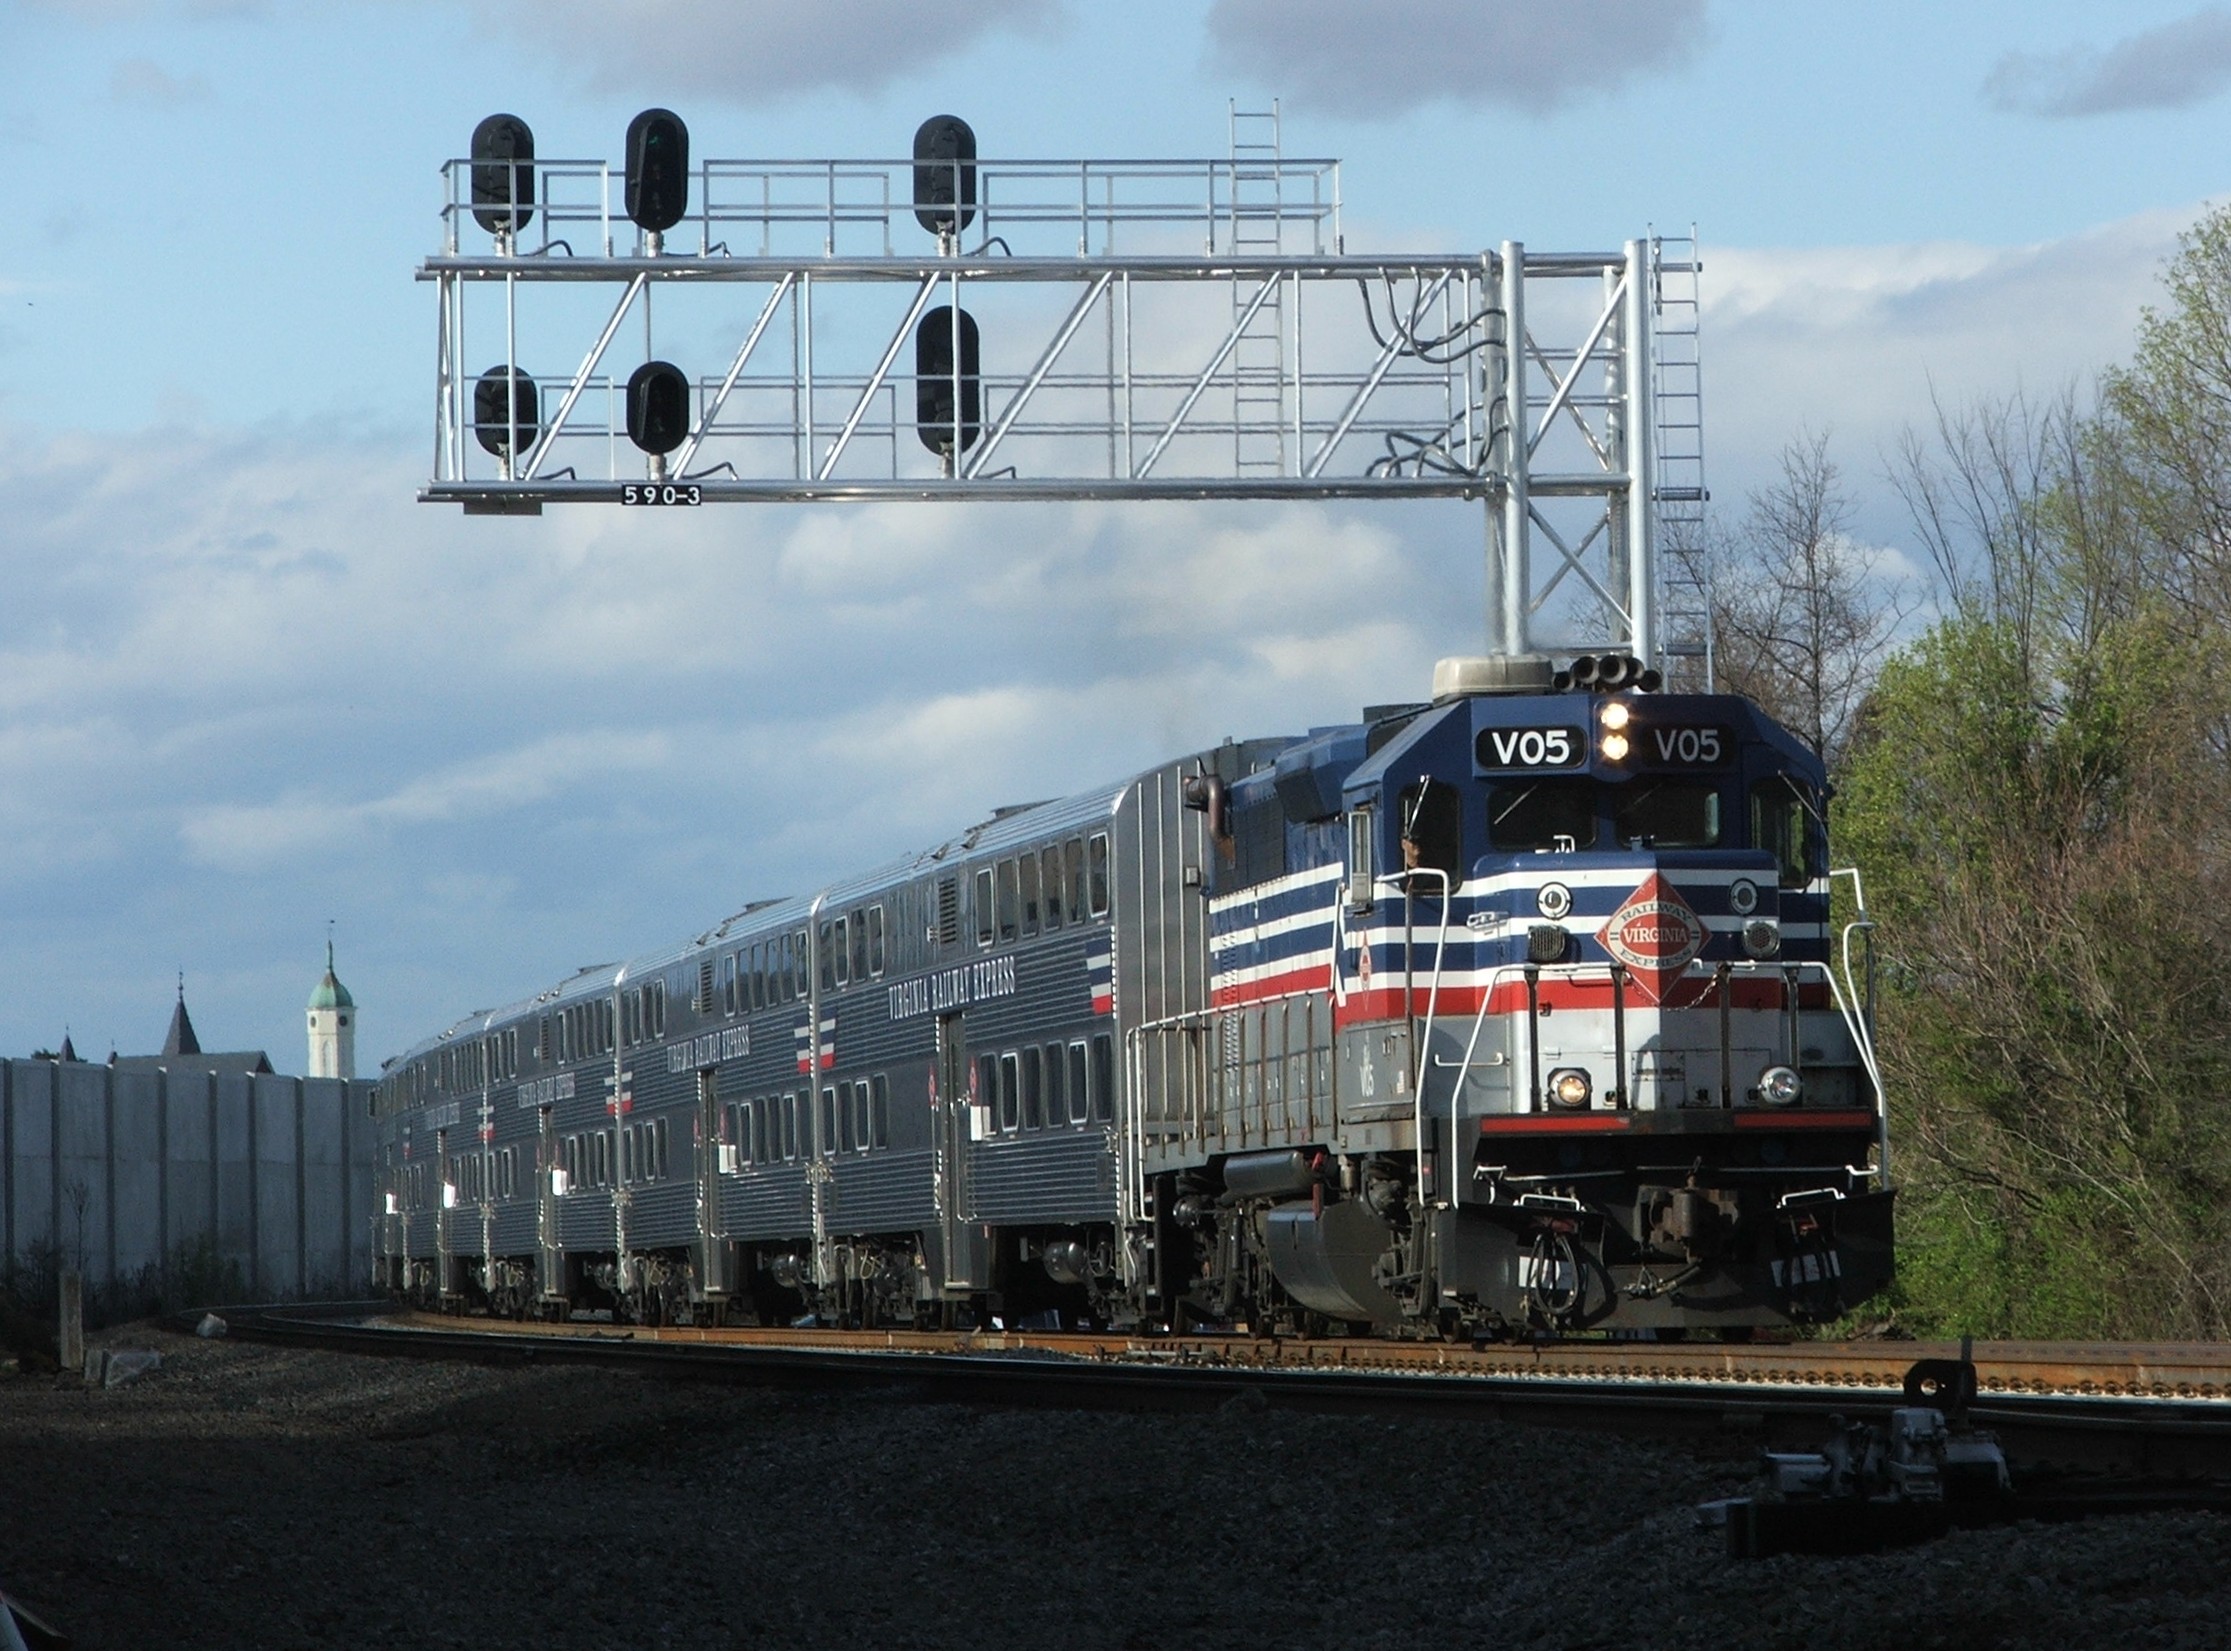 The earliest southbound VRE heads south through FB with V05, clean from the morning down pours.